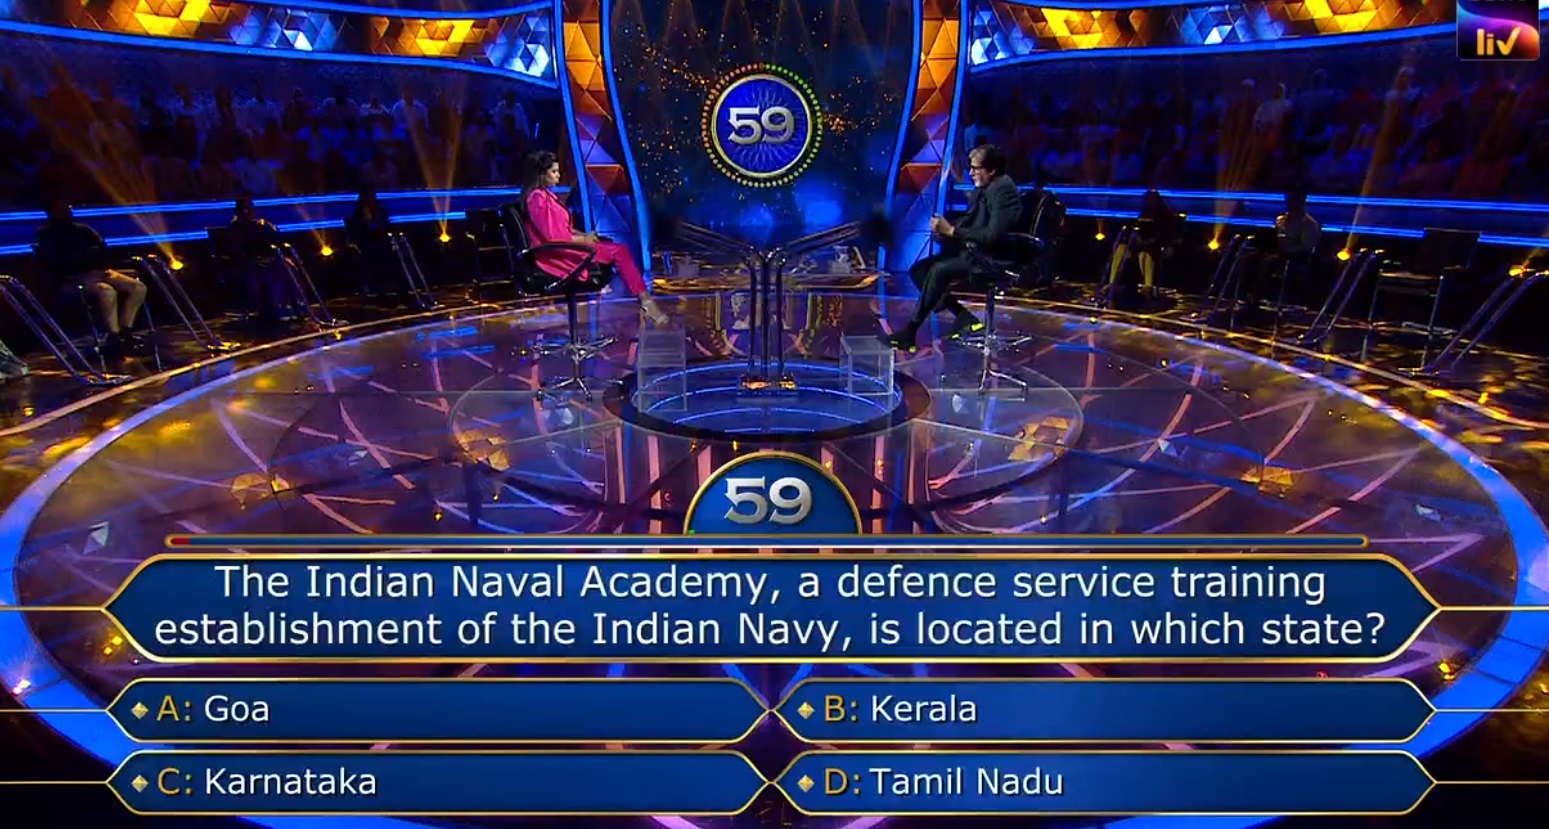 Ques : The Indian Naval Academy, a defence service training establishment of the Indian Navy, is located in which state?